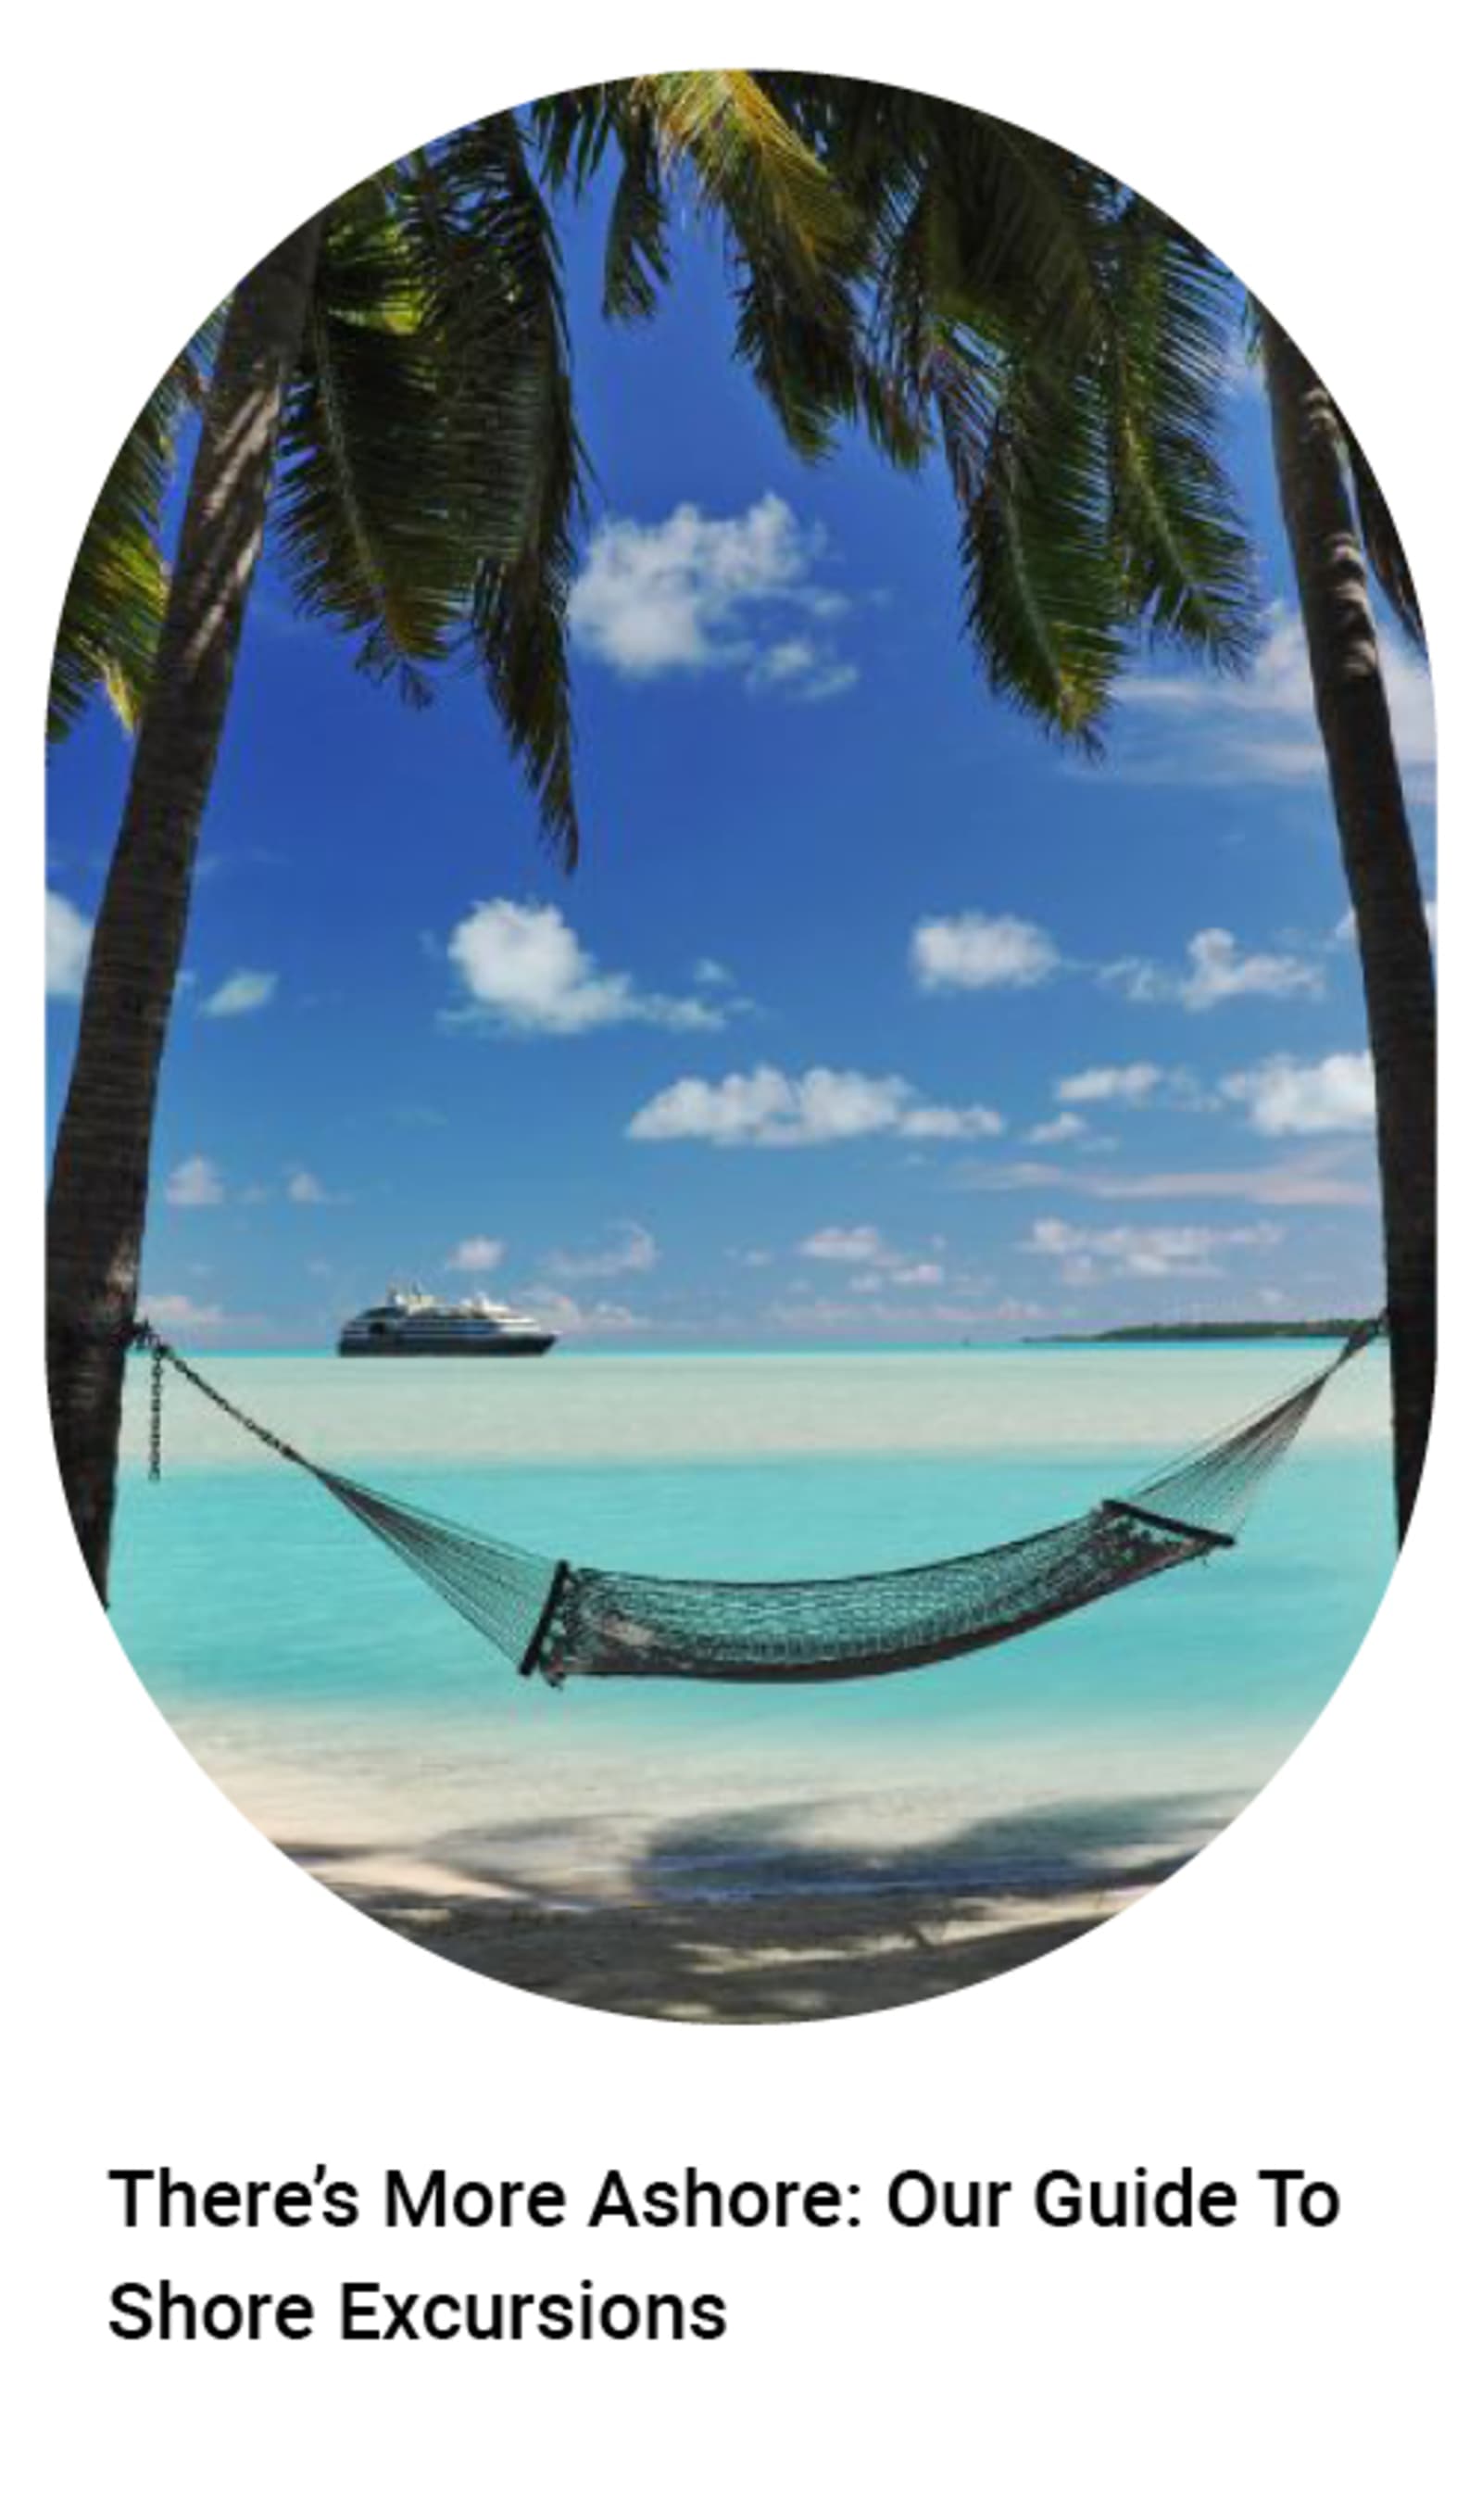 Hammock between two palm trees with a cruise ship far away on the horizon - There's more ashore: our guide to shore excursions